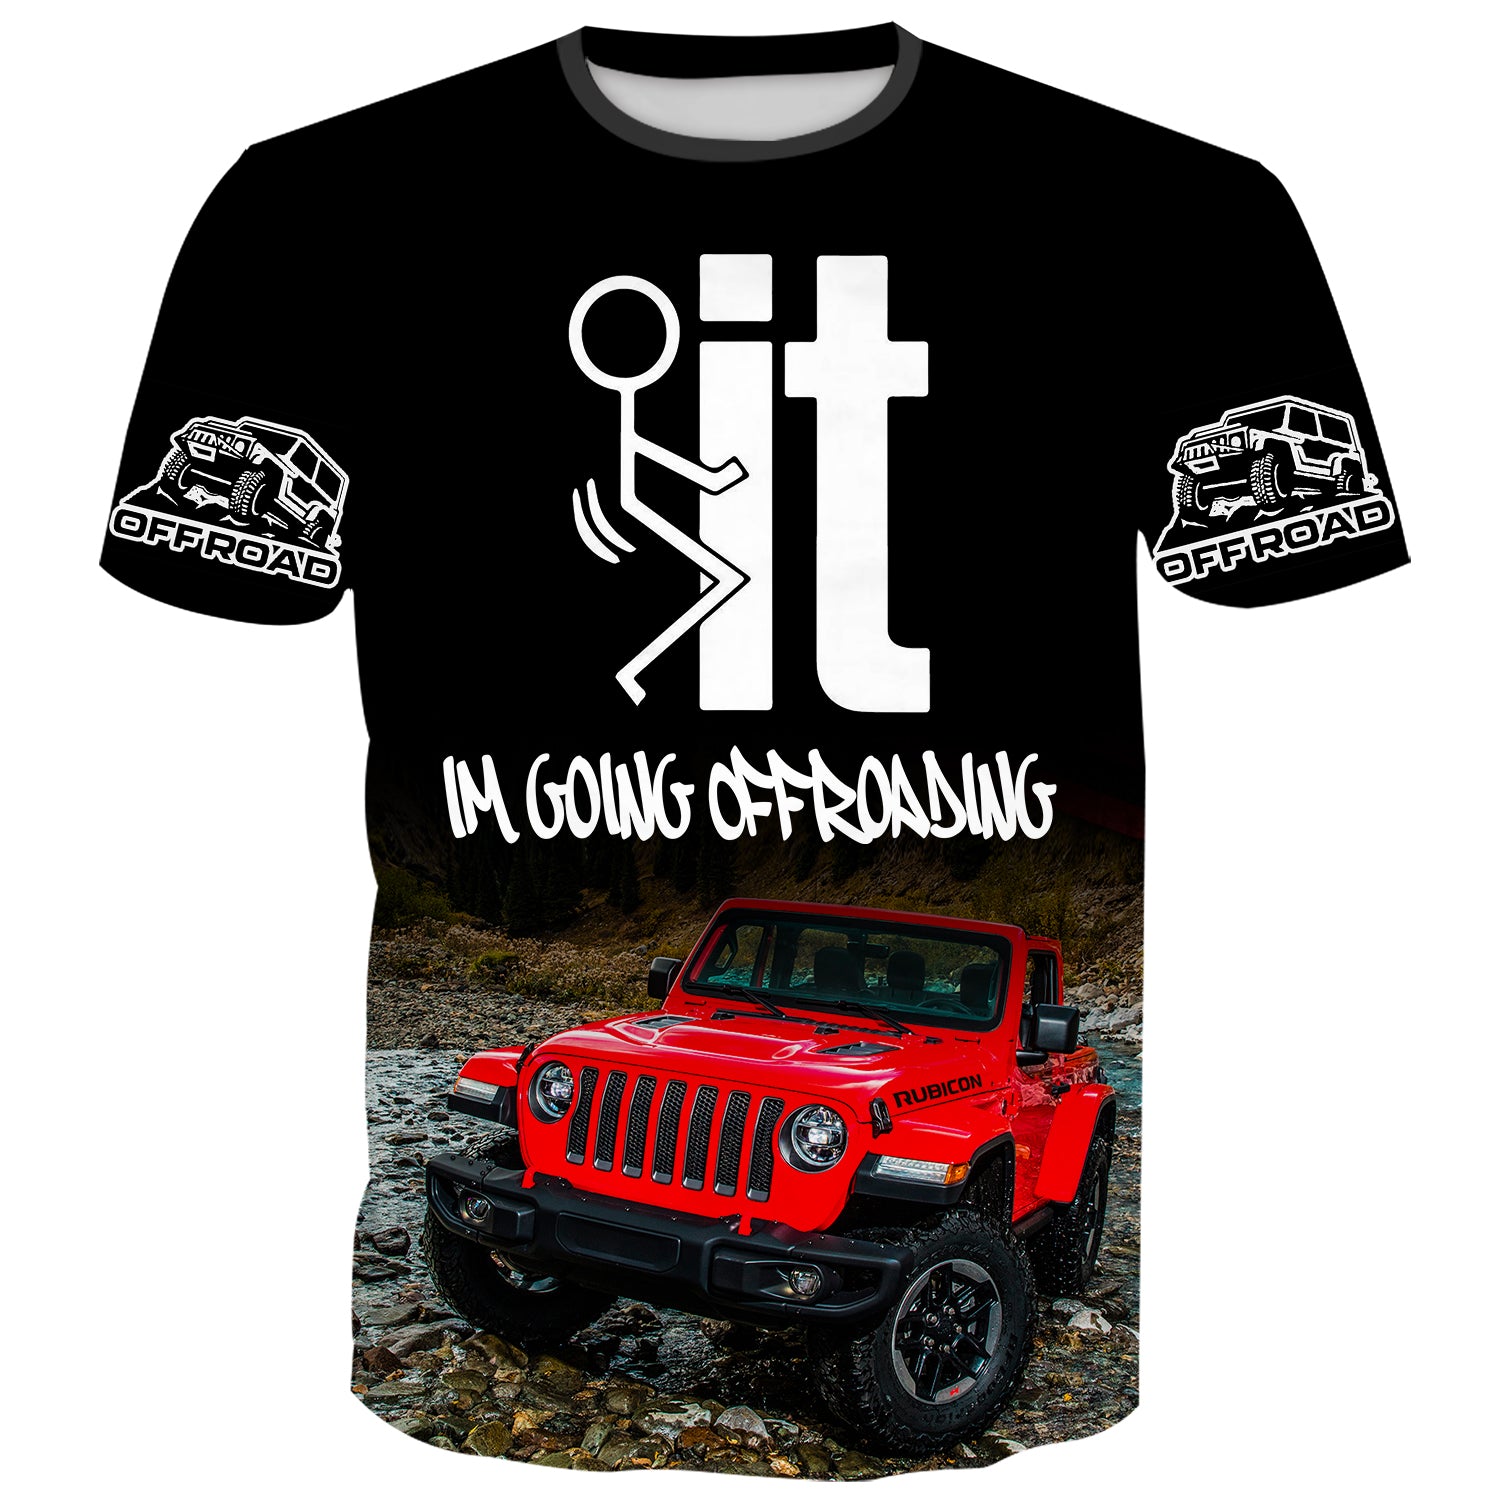 I am going Off-Roading - Jeep T-Shirt